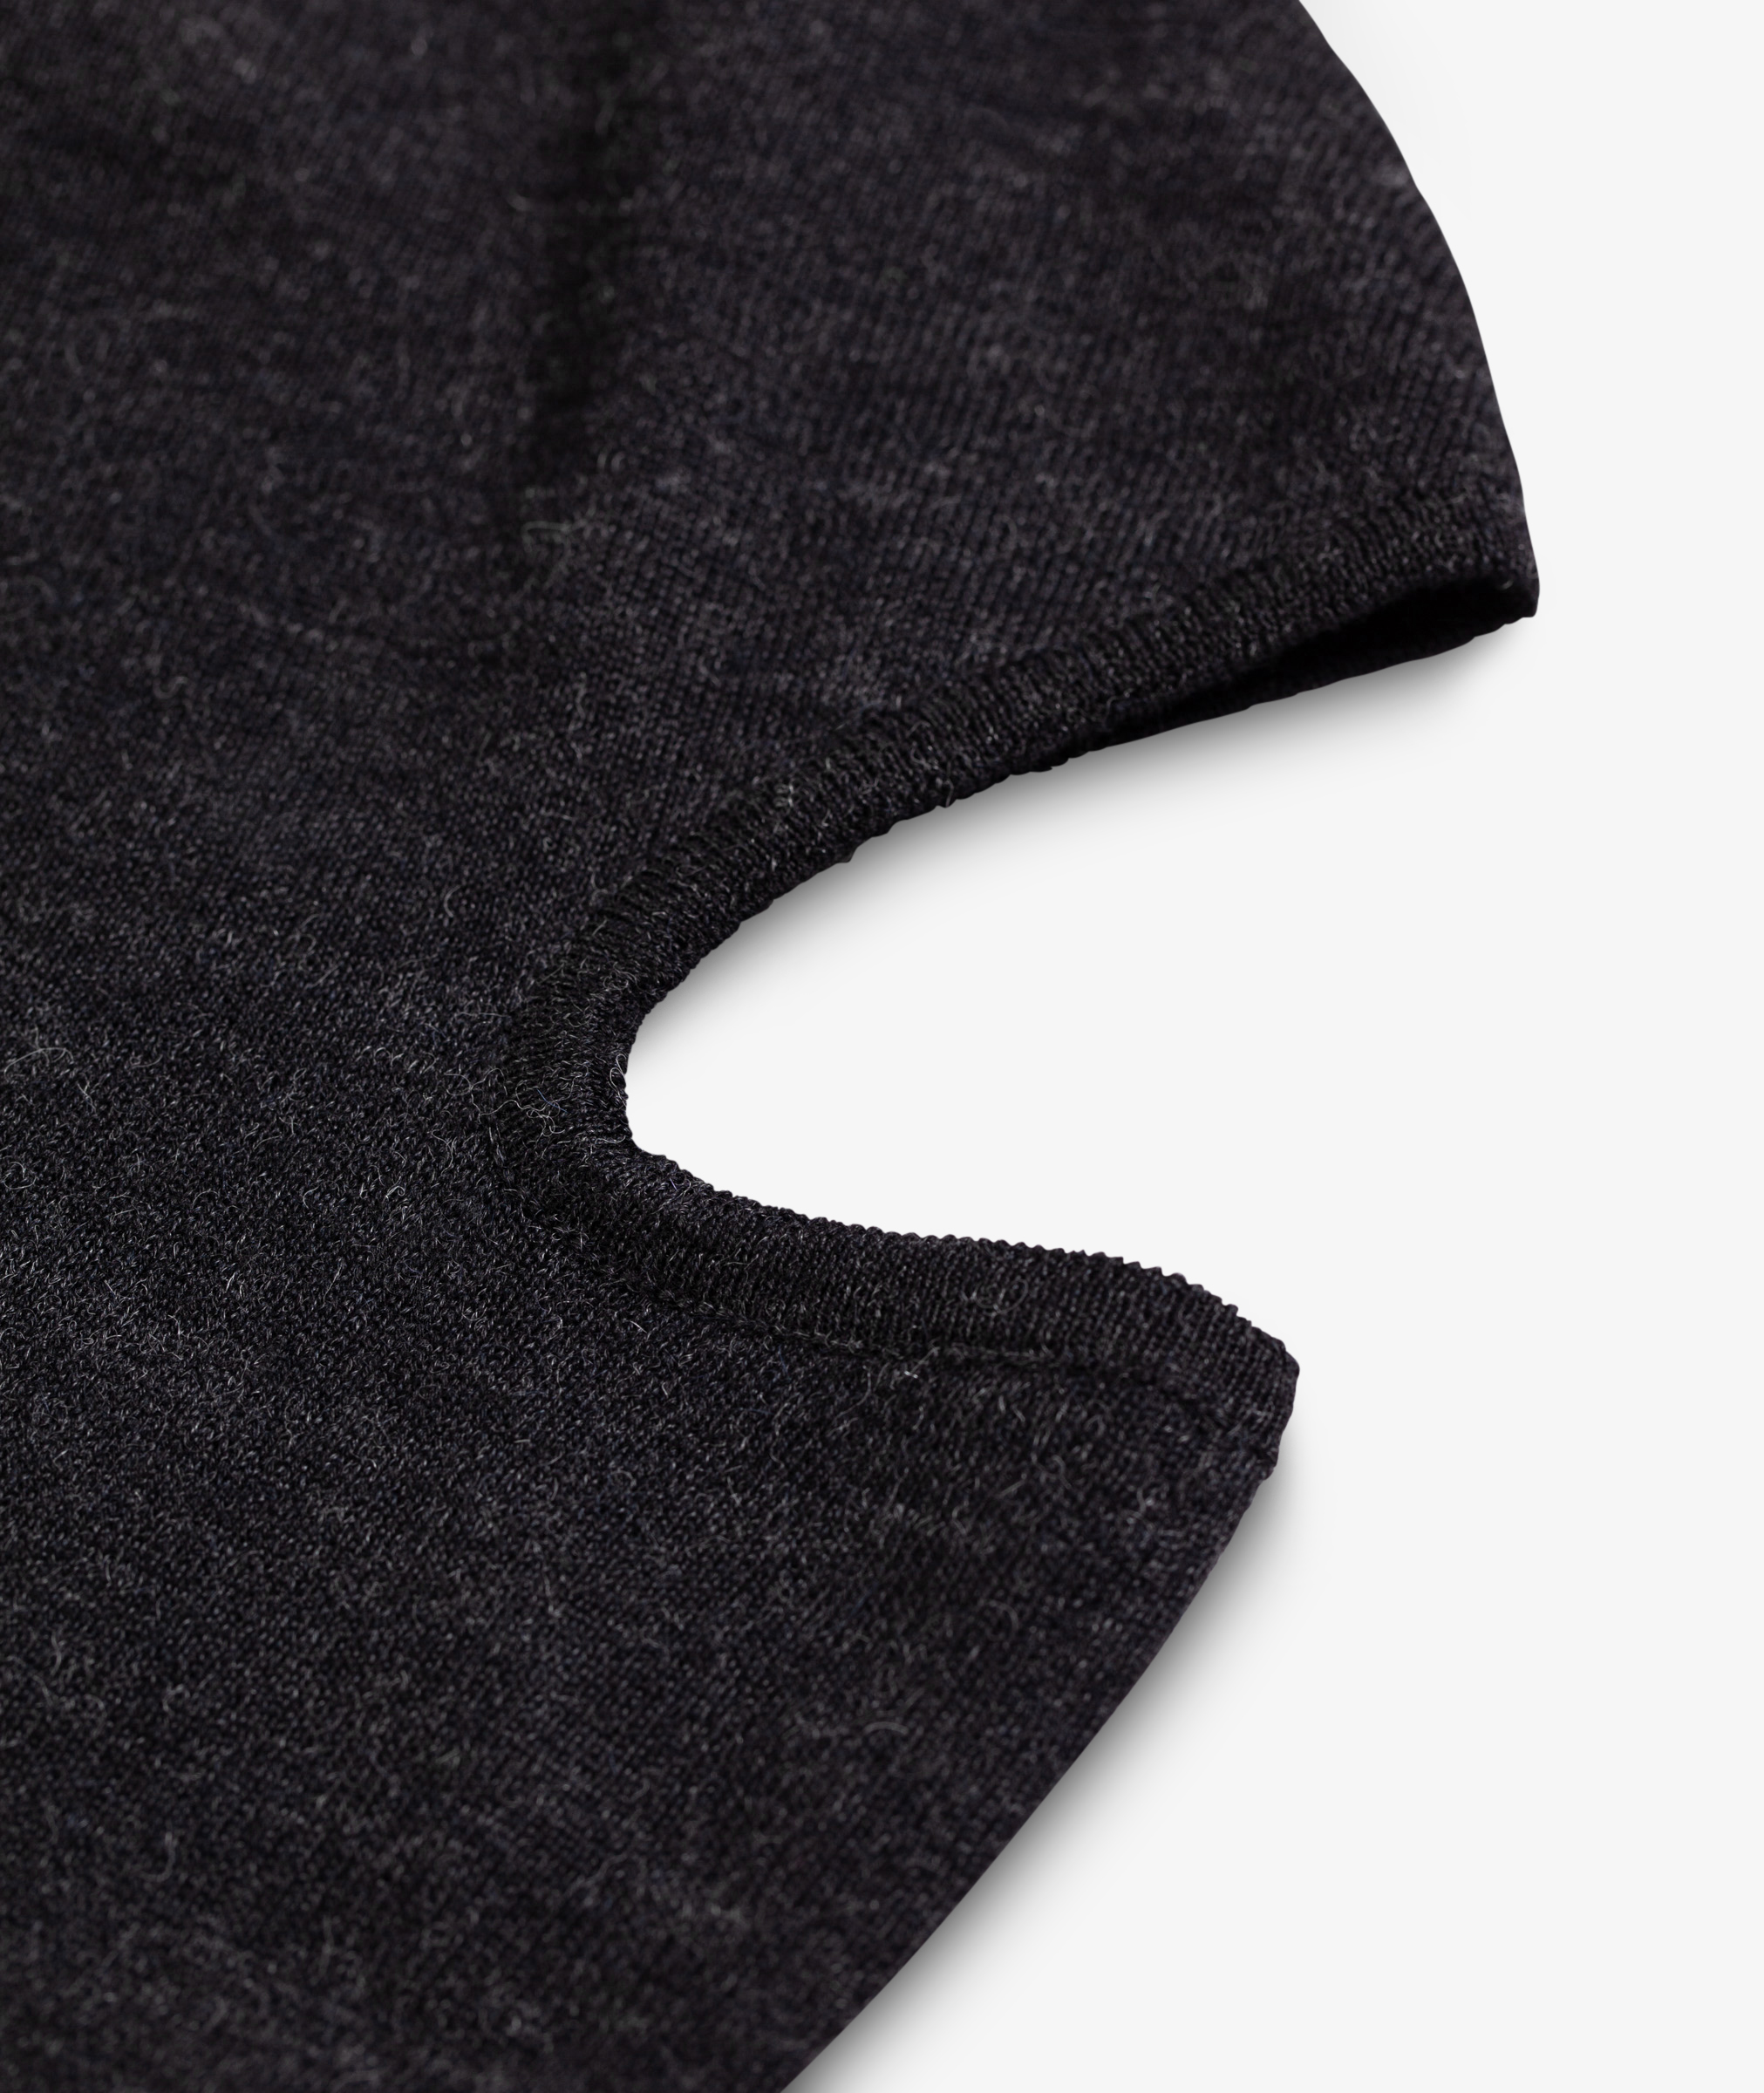 Norse Store | Shipping Worldwide - Snow Peak and Inoue Brothers Knit ...